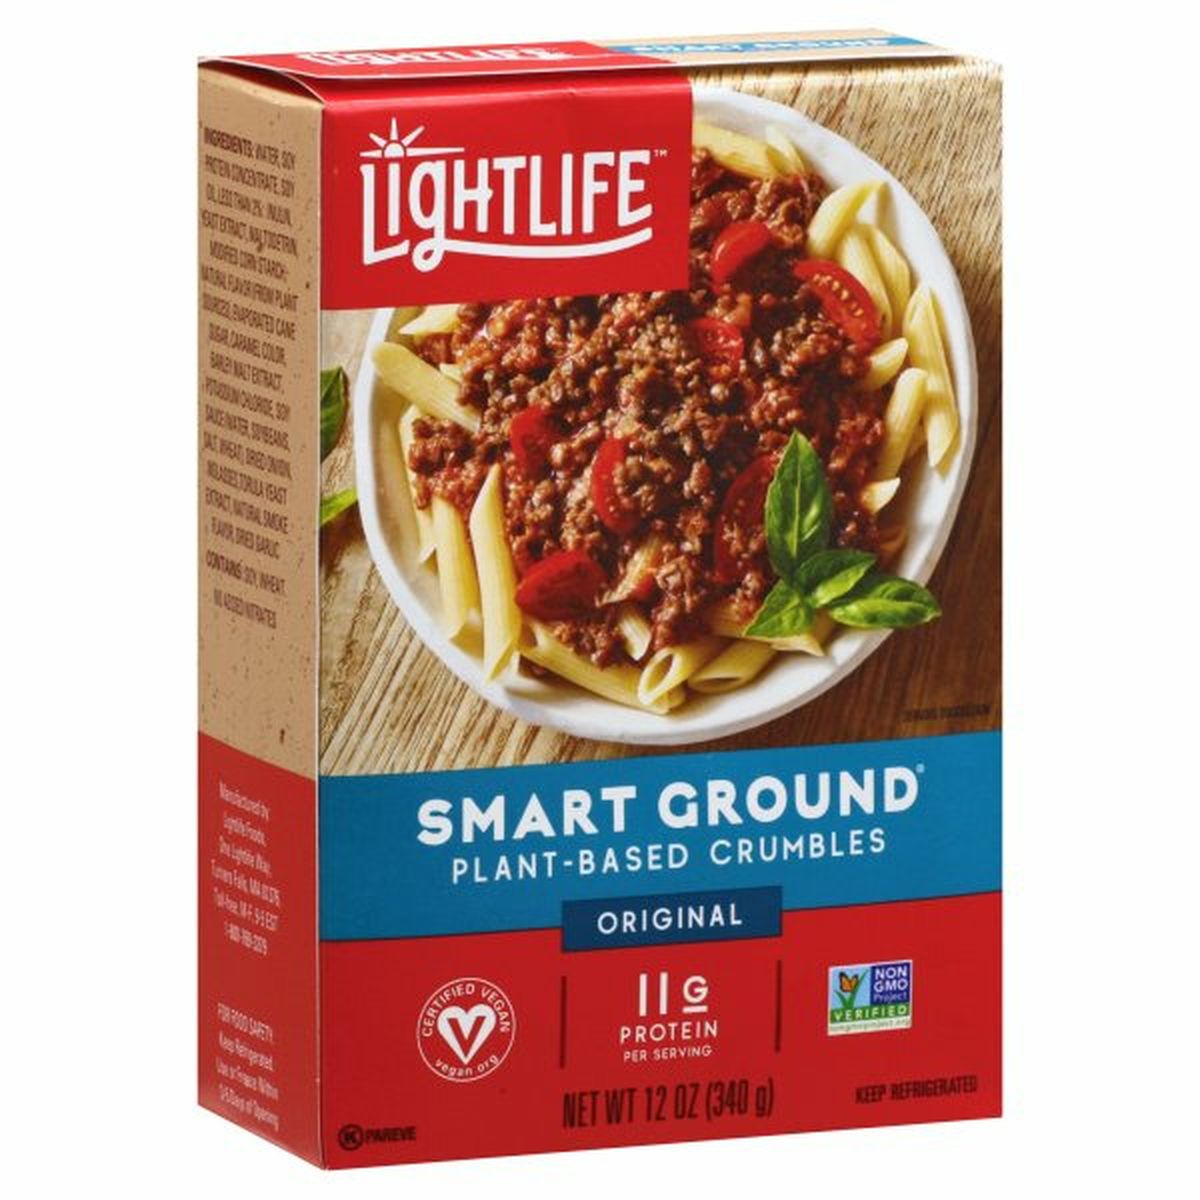 Calories in Lightlife Smart Ground Crumbles, Plant-Based, Original